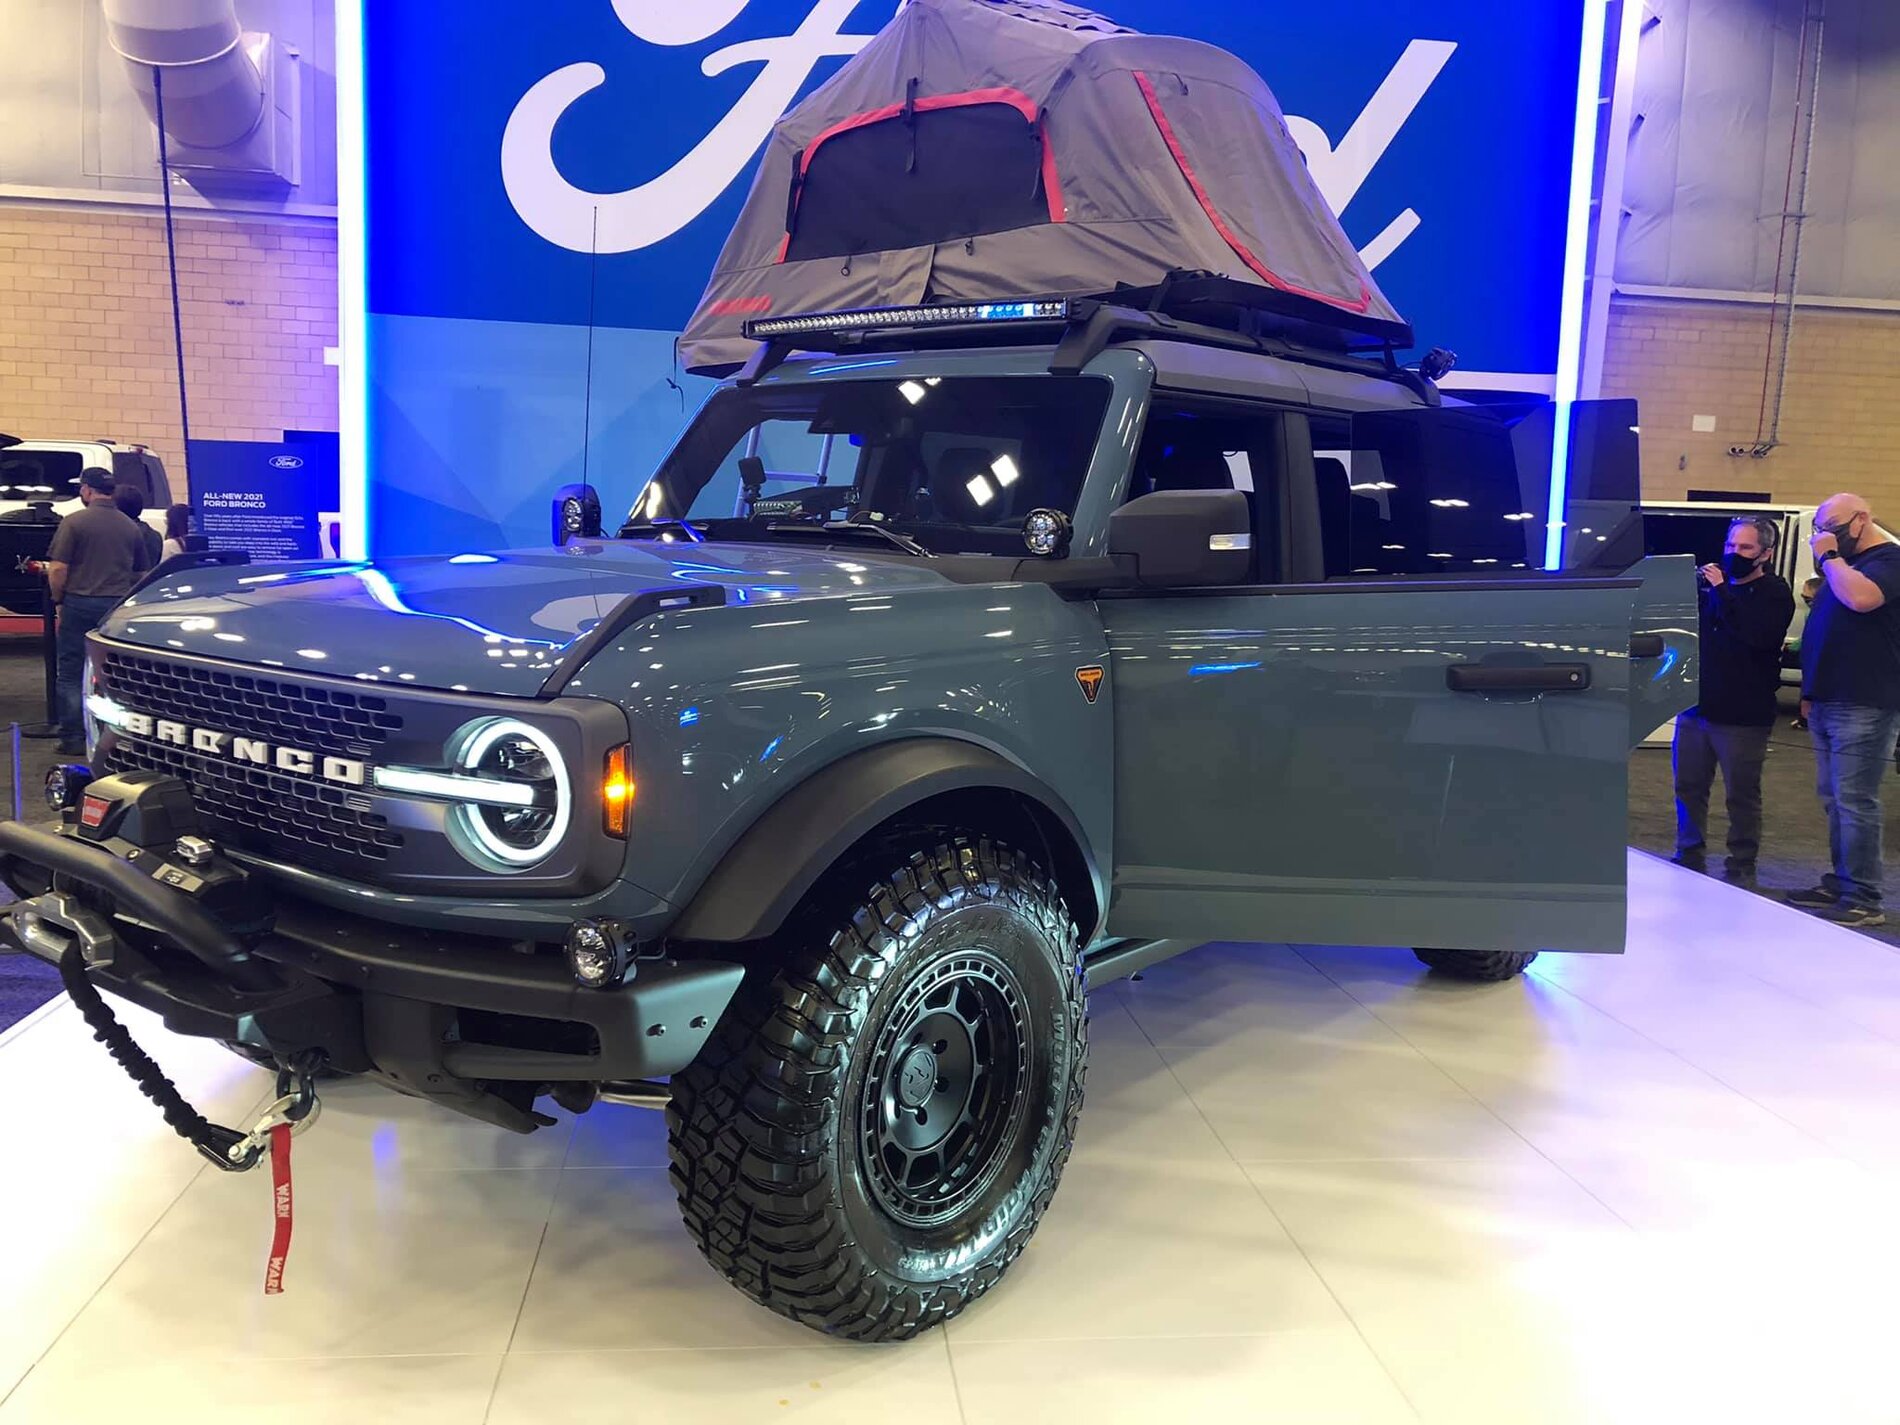 Ford Bronco Pics & Videos From OKC Show: 2-Door Trail Concept and Overland Concept Broncos 157302285_10224037711183301_8174457864474802290_o